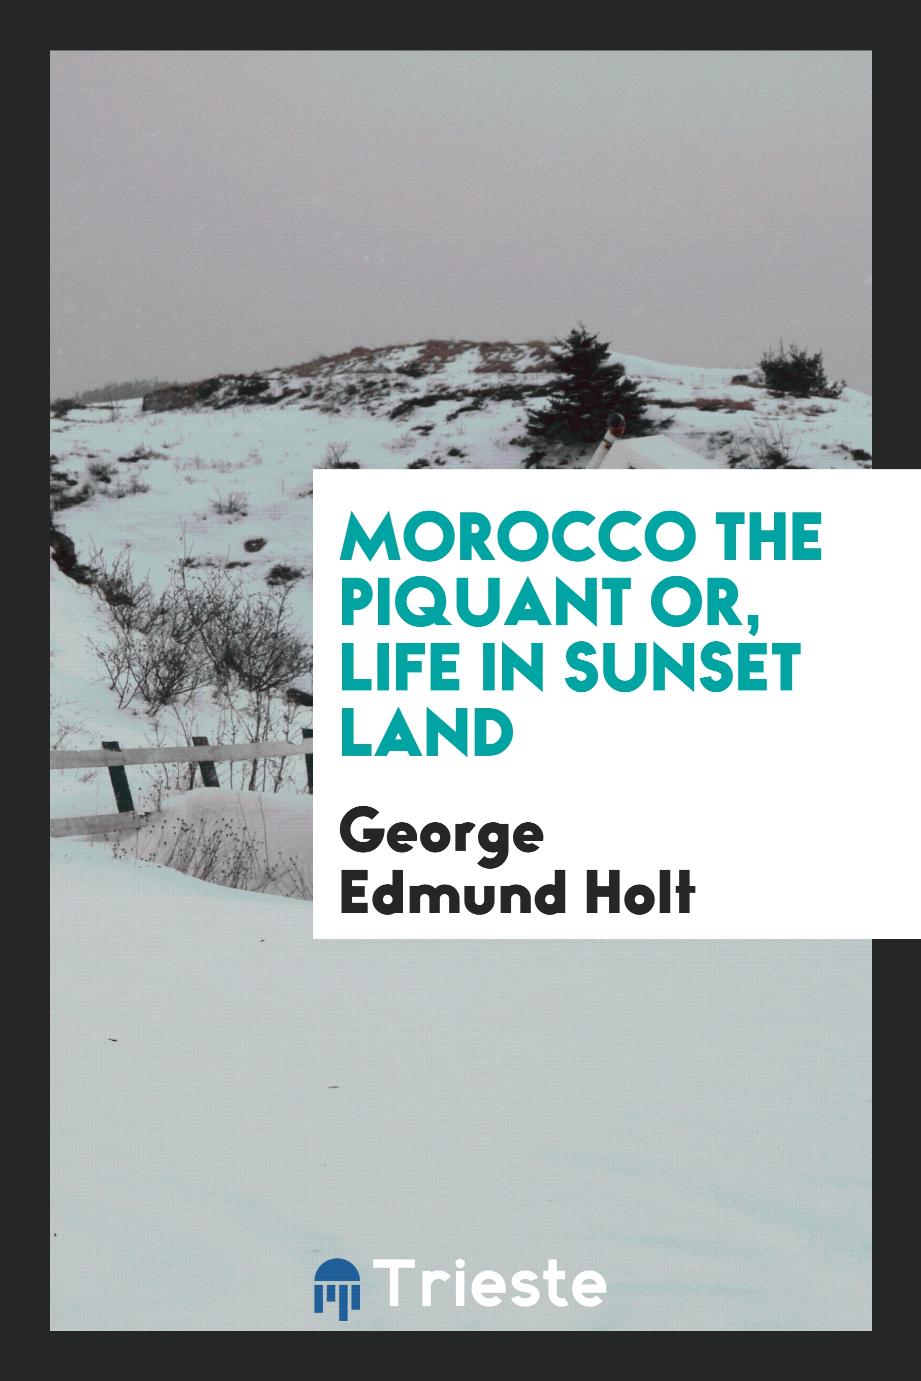 Morocco the Piquant or, Life in Sunset Land